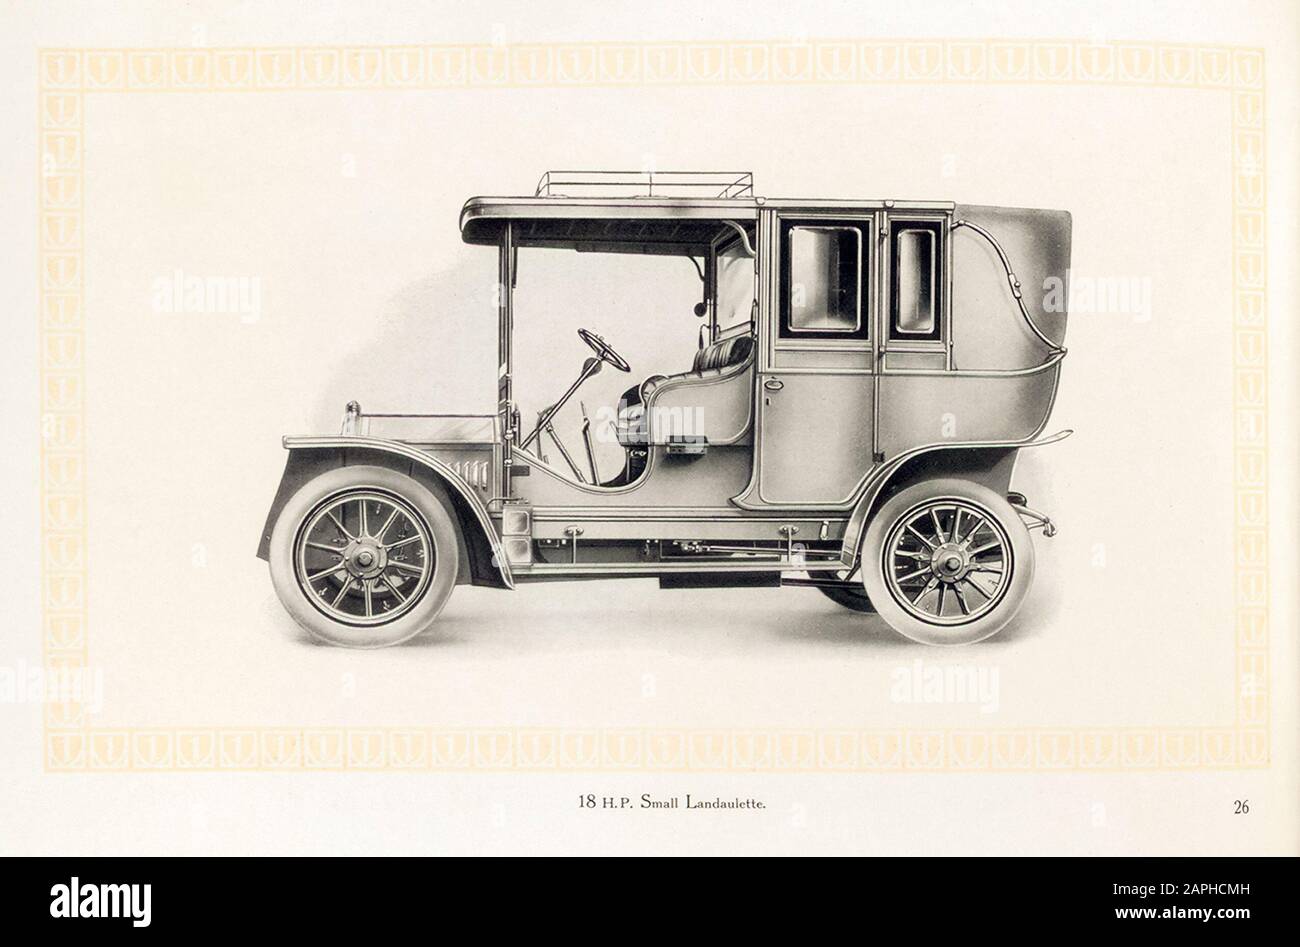 Vintage car, Benz motor car, 18 hp small Landaulette, from the Benz & Co trade catalogue, illustration 1909 Stock Photo